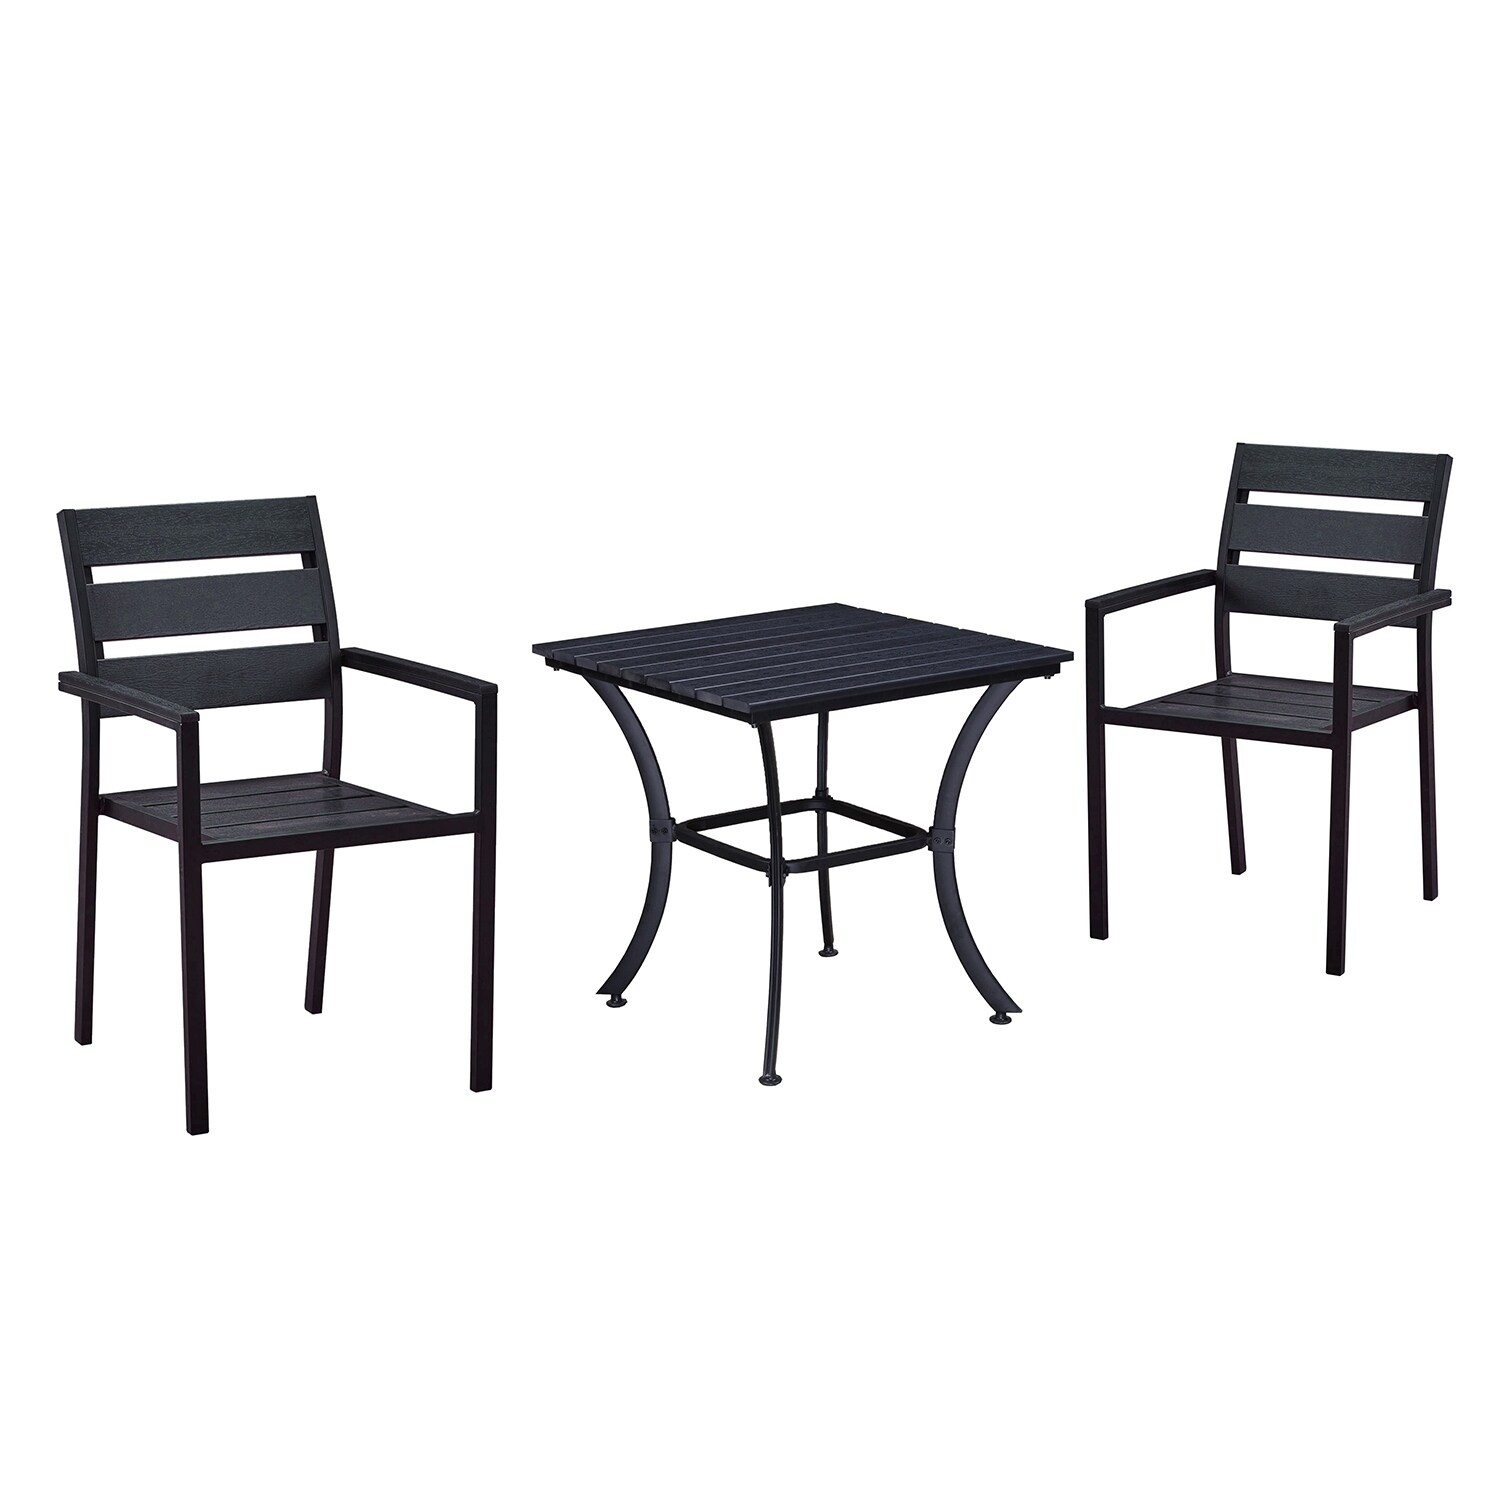 Outdoor Wooden Table And Two Chairs  . If You Are Looking For Outdoor Furniture Plans Or You Are Just Trying To Learn How To Build An Outdoor Bench, This The Perfect Starting.